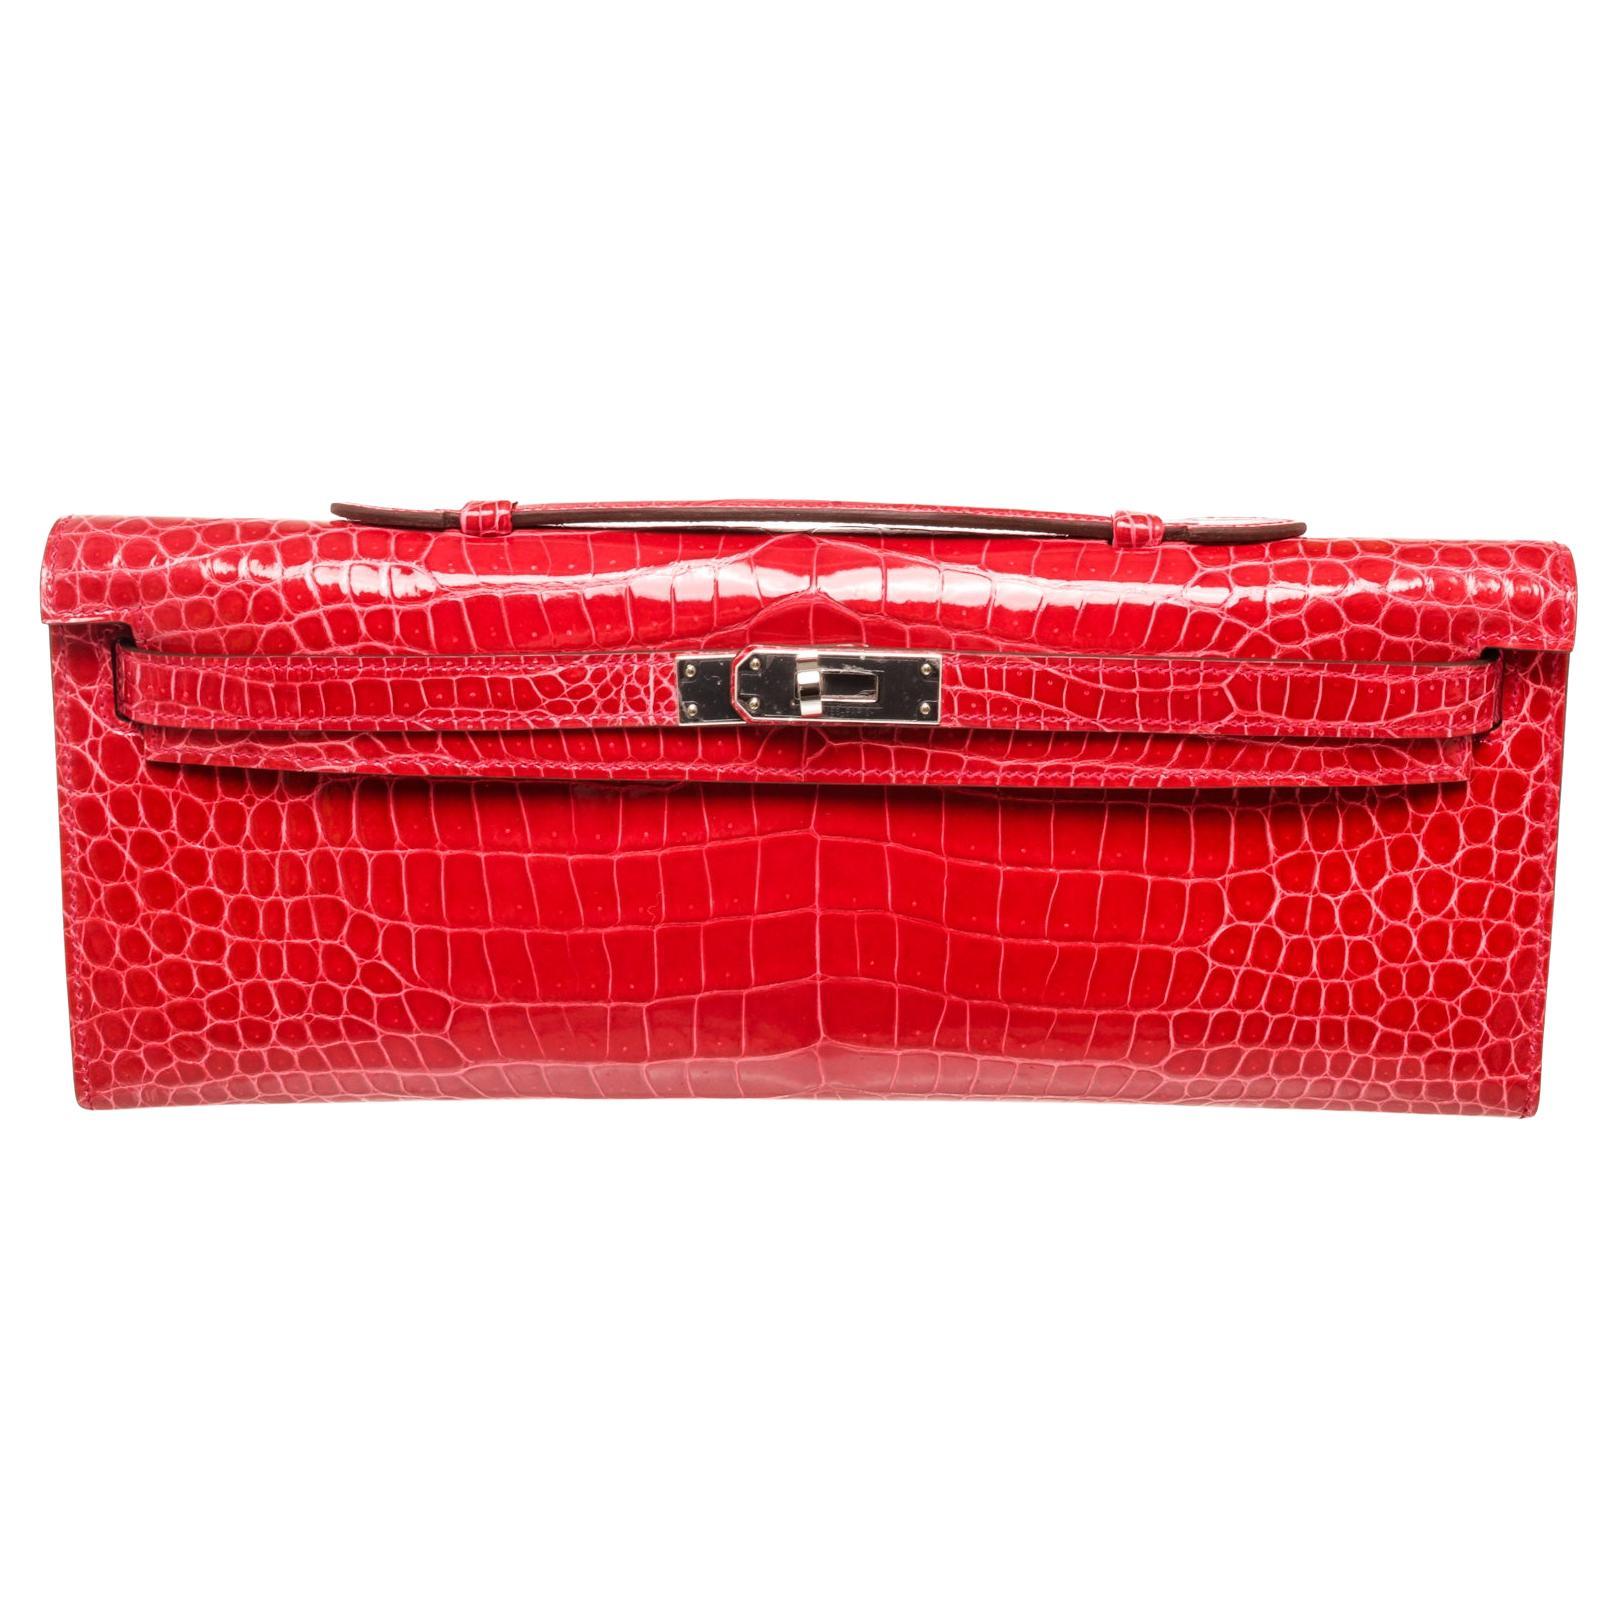 Hermes Red Electric Crocodile Kelly Cut Clutch Bag For Sale